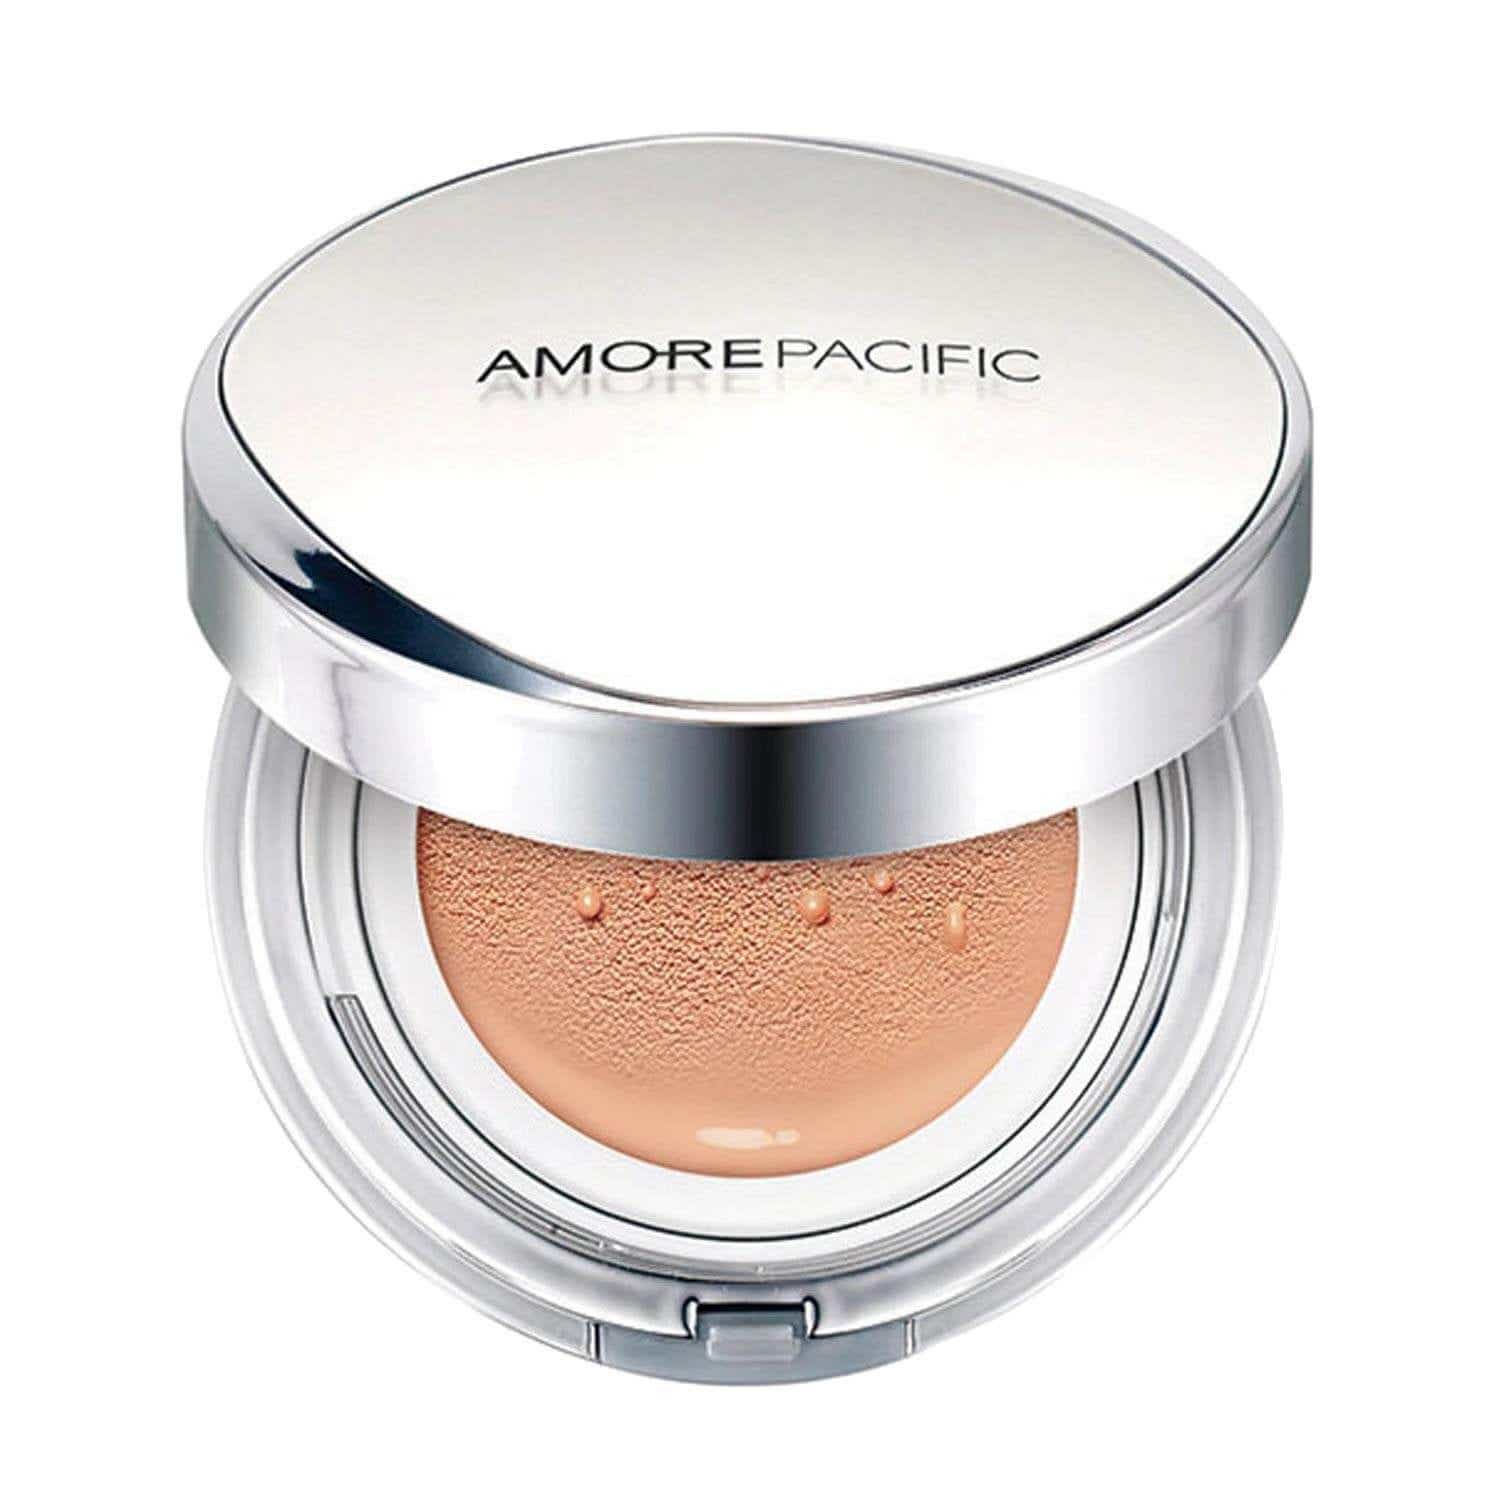 amore pacific cushion foundation